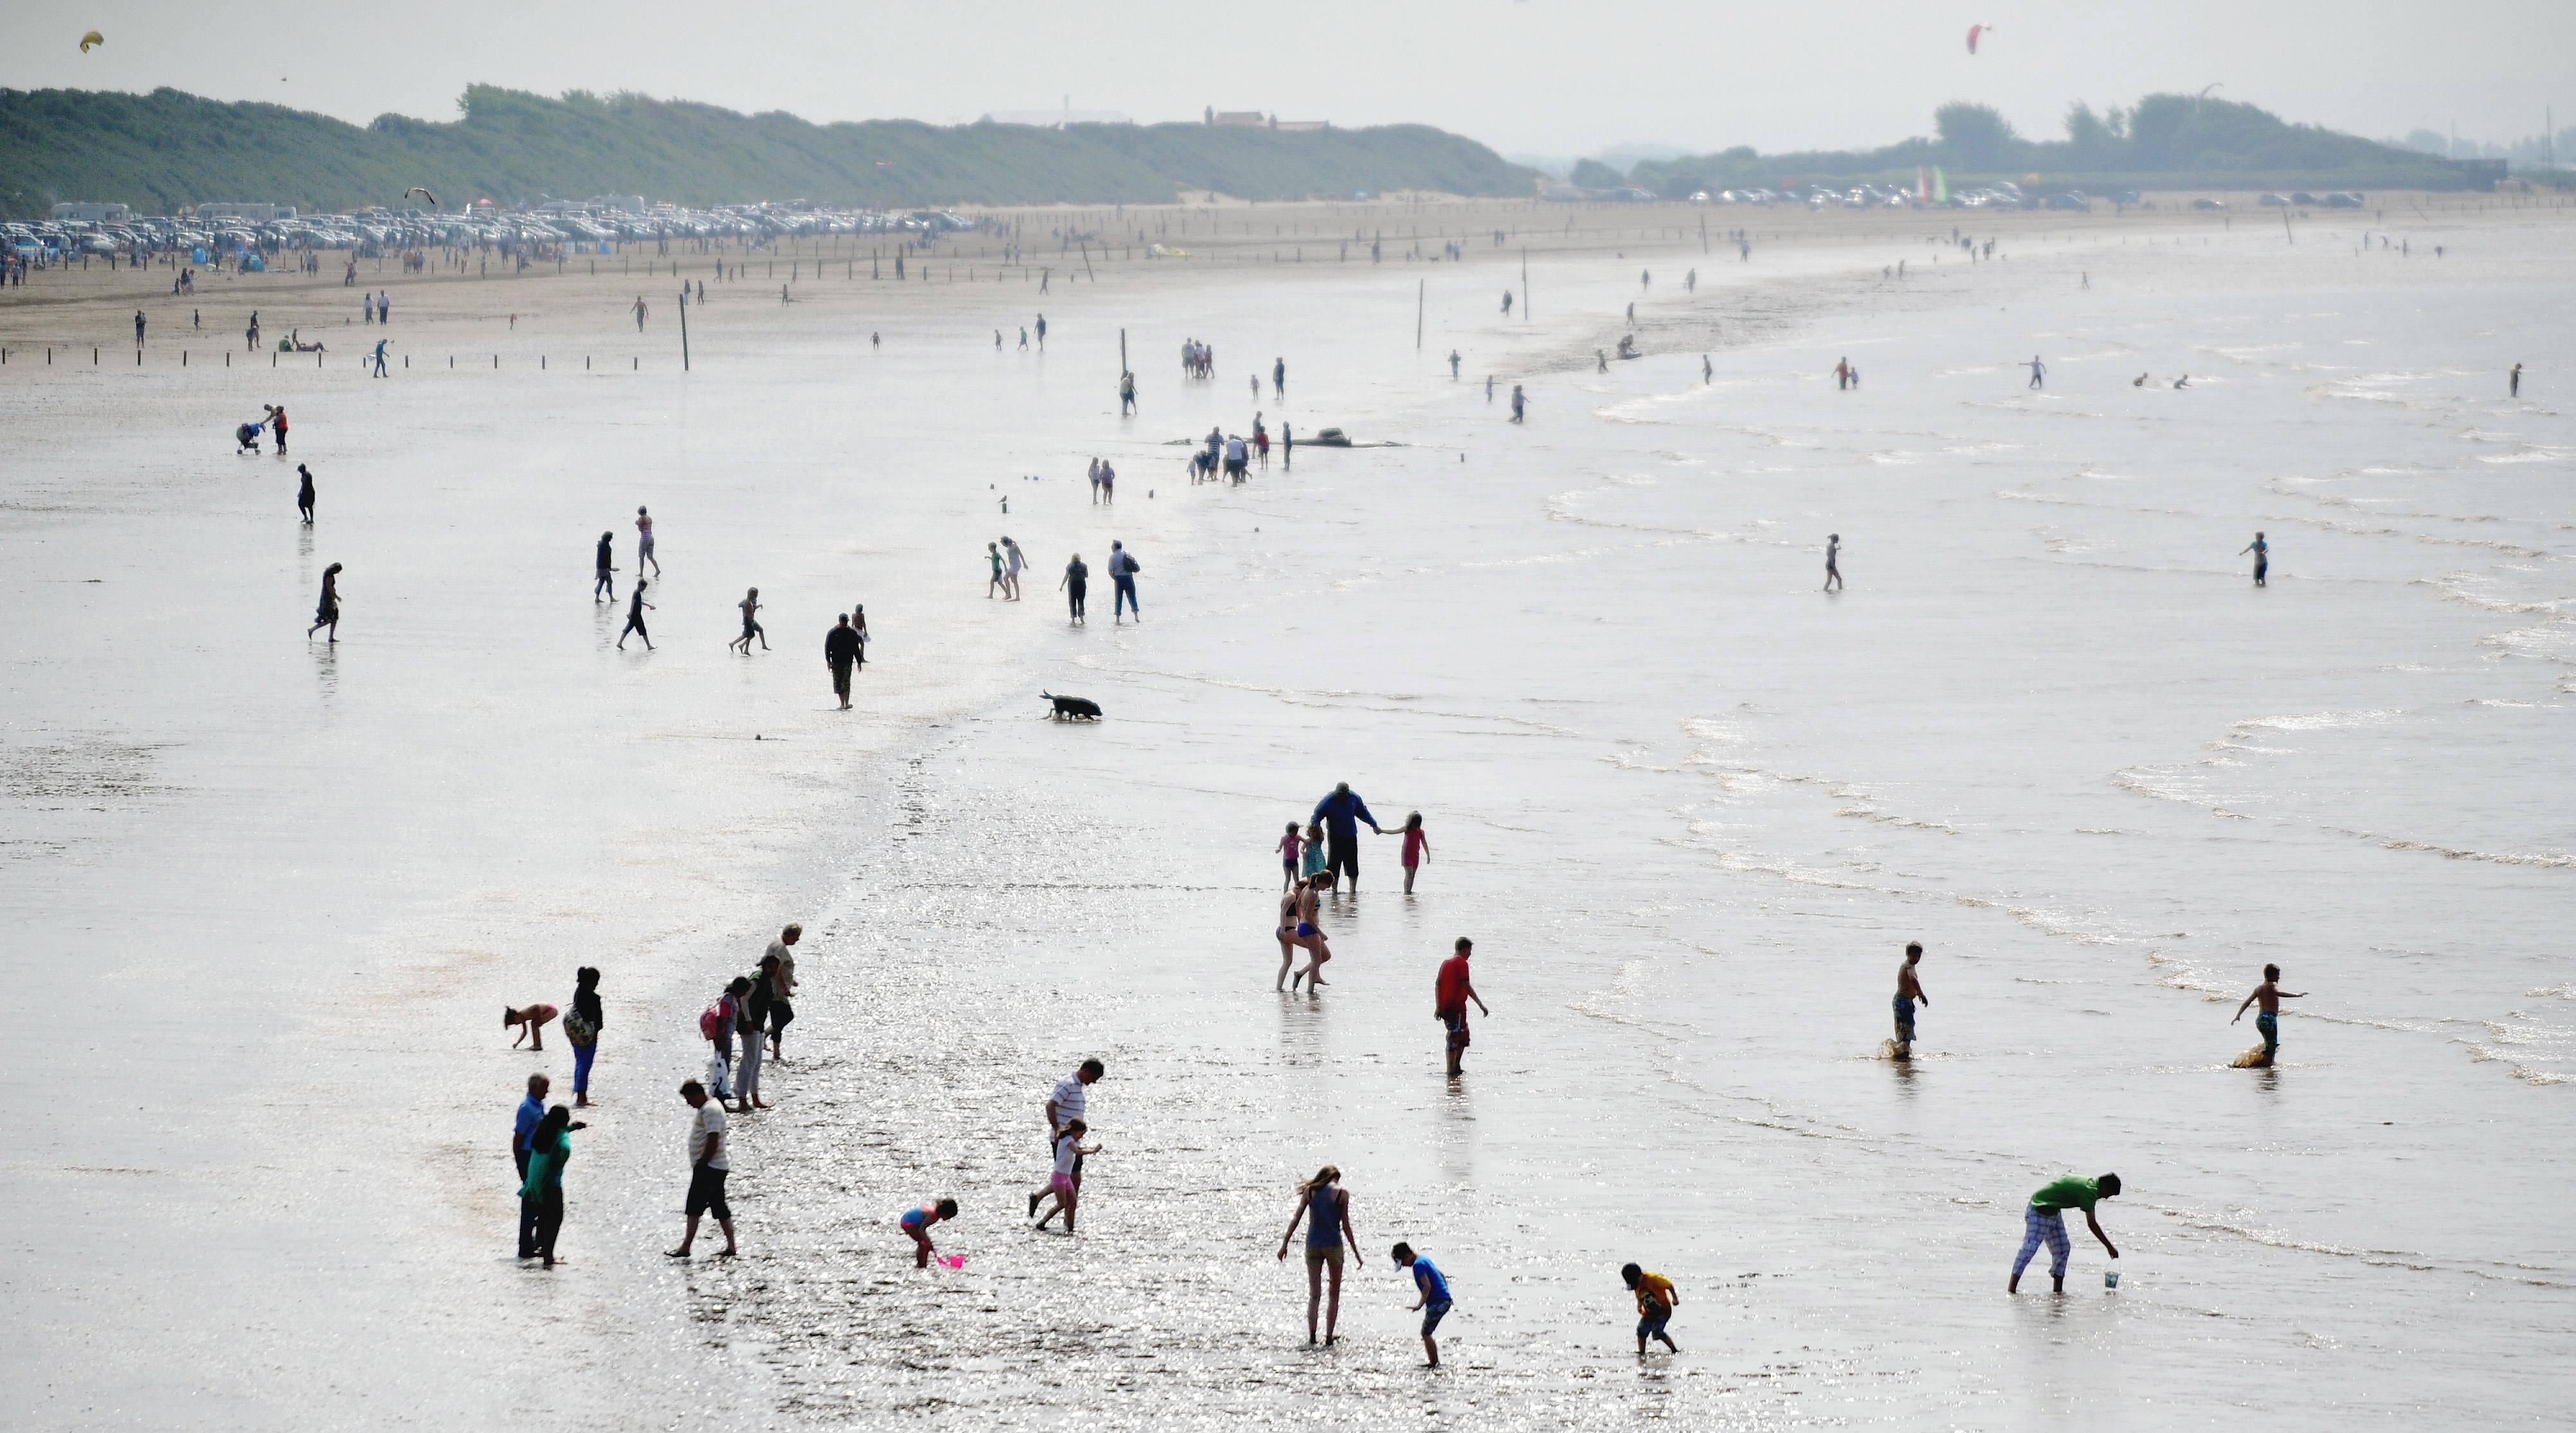 Weston-super-Mare is among the spots where the quality of bathing water has been judged as poor